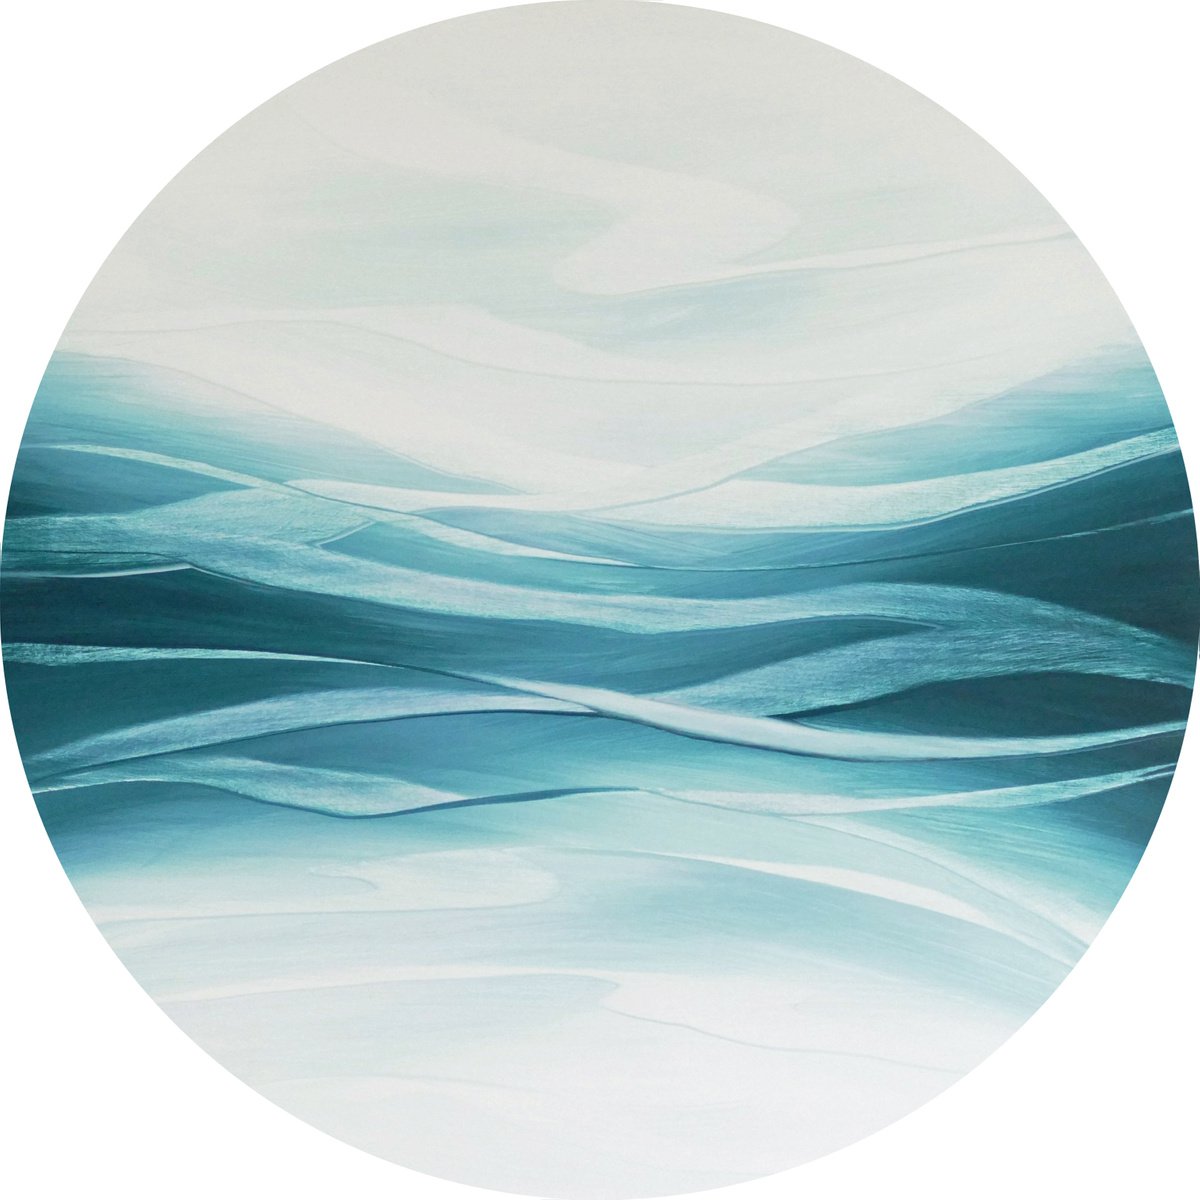 Ebb and Flow by Noeline Thomson